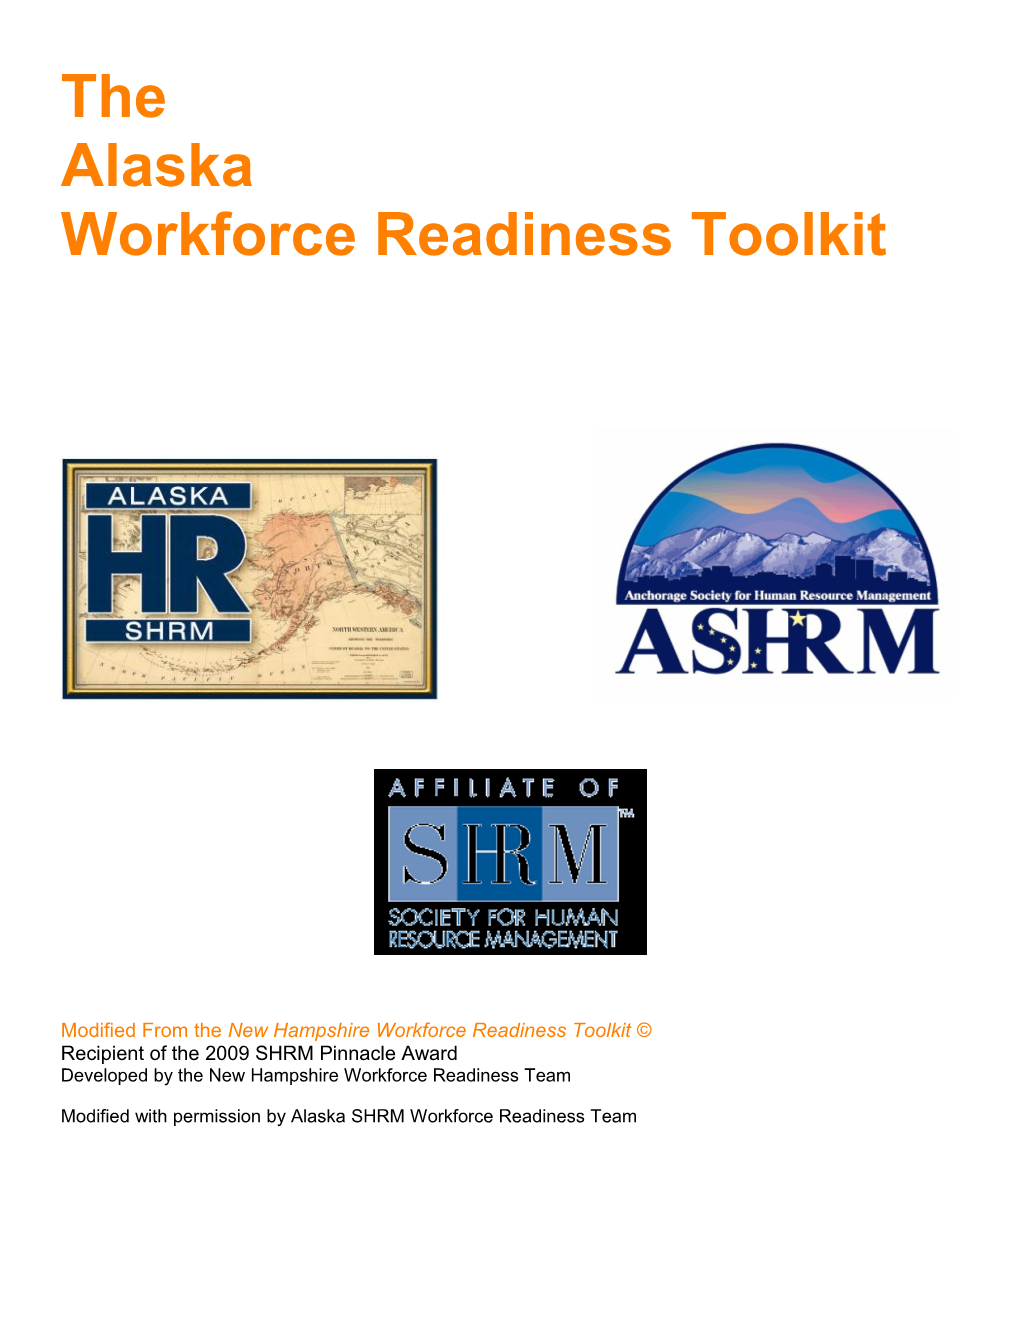 Modified from the New Hampshire Workforce Readiness Toolkit